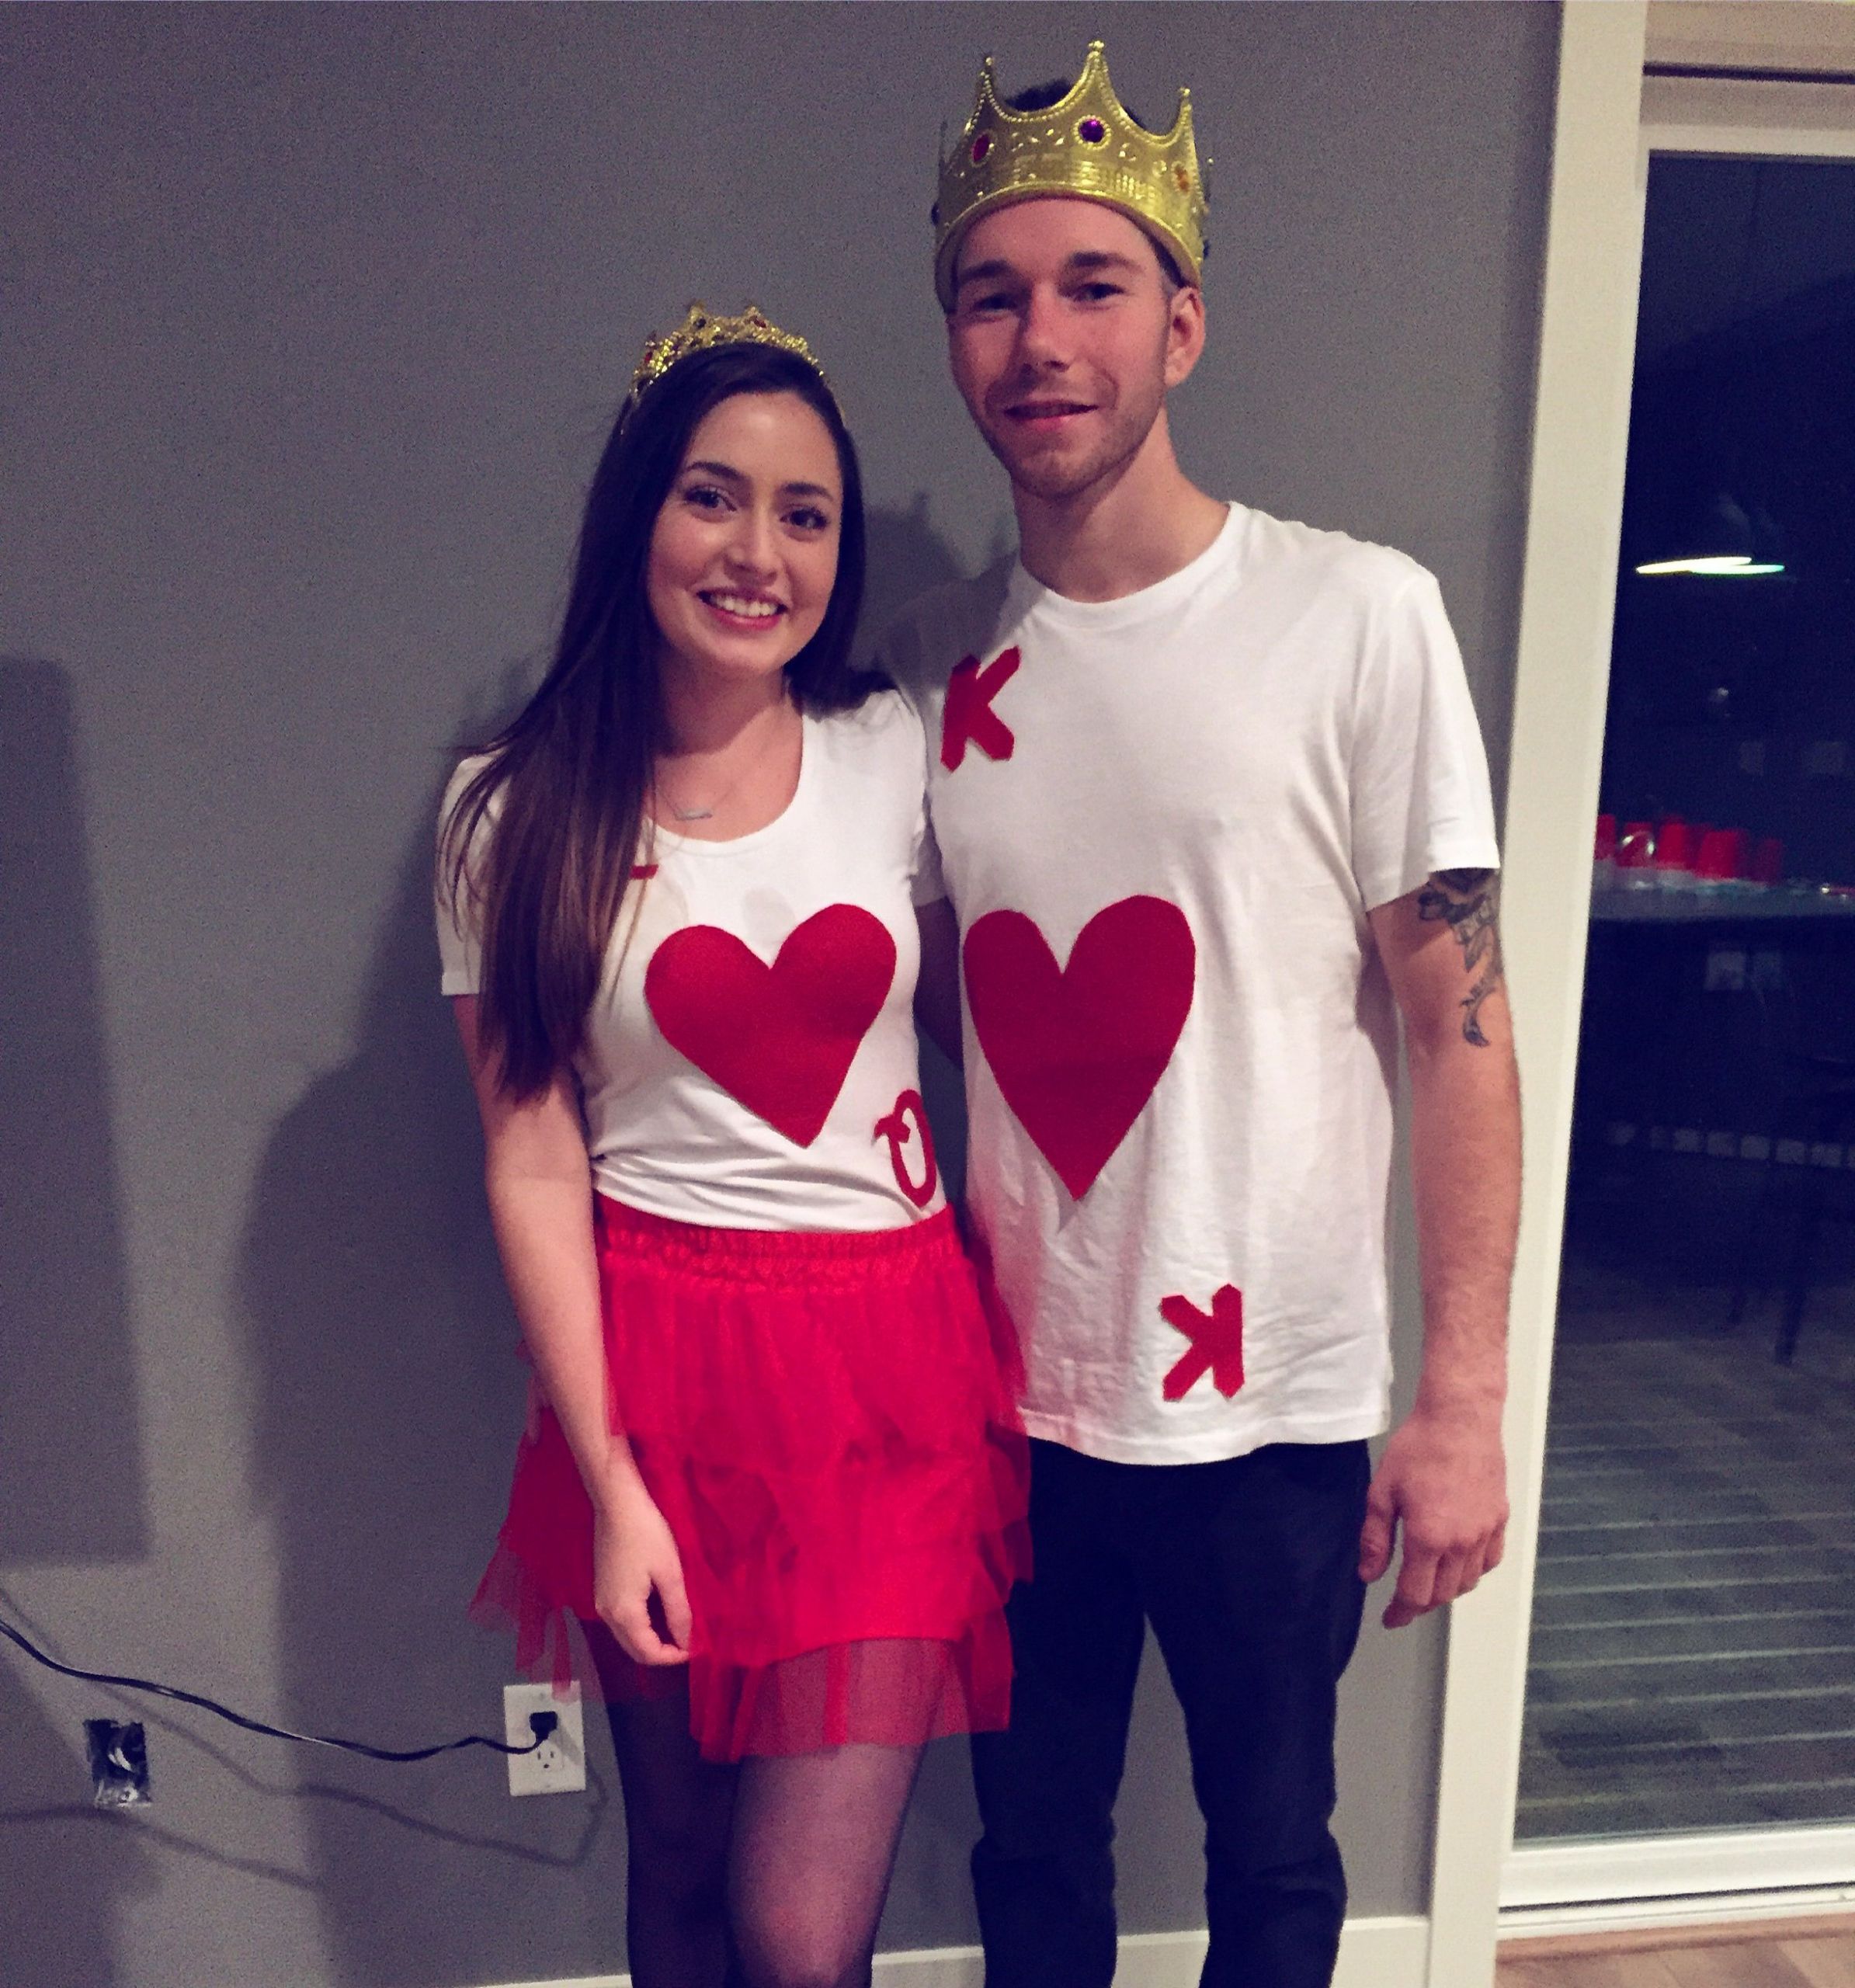 DIY Couples Halloween Costumes
 25 Days of Fall DIY Day 22 Couples Costumes